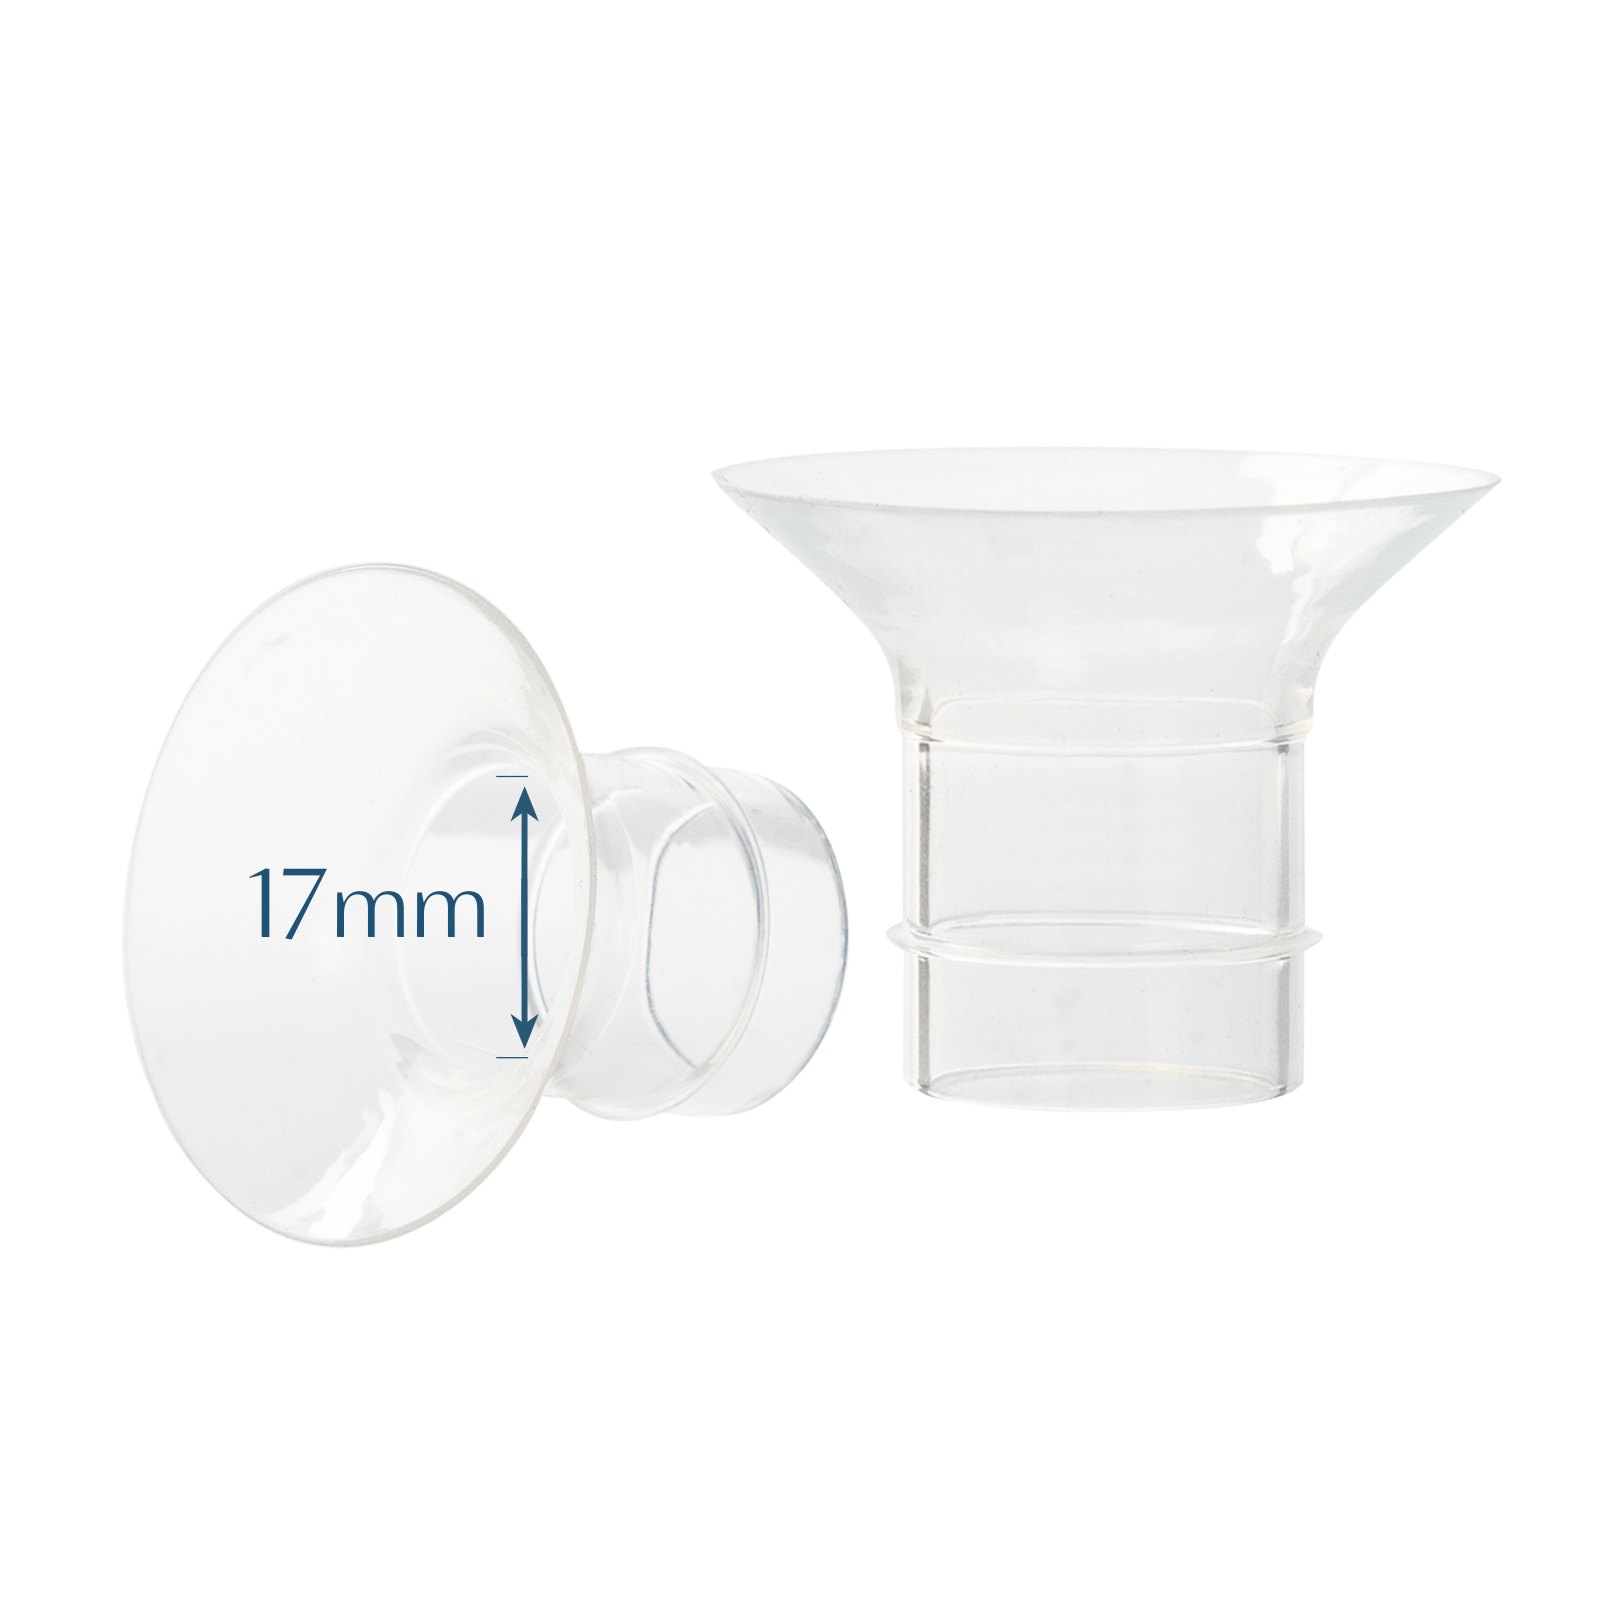 idaho jones flange inserts (17mm) as component of pump-a-collect milk collection cups